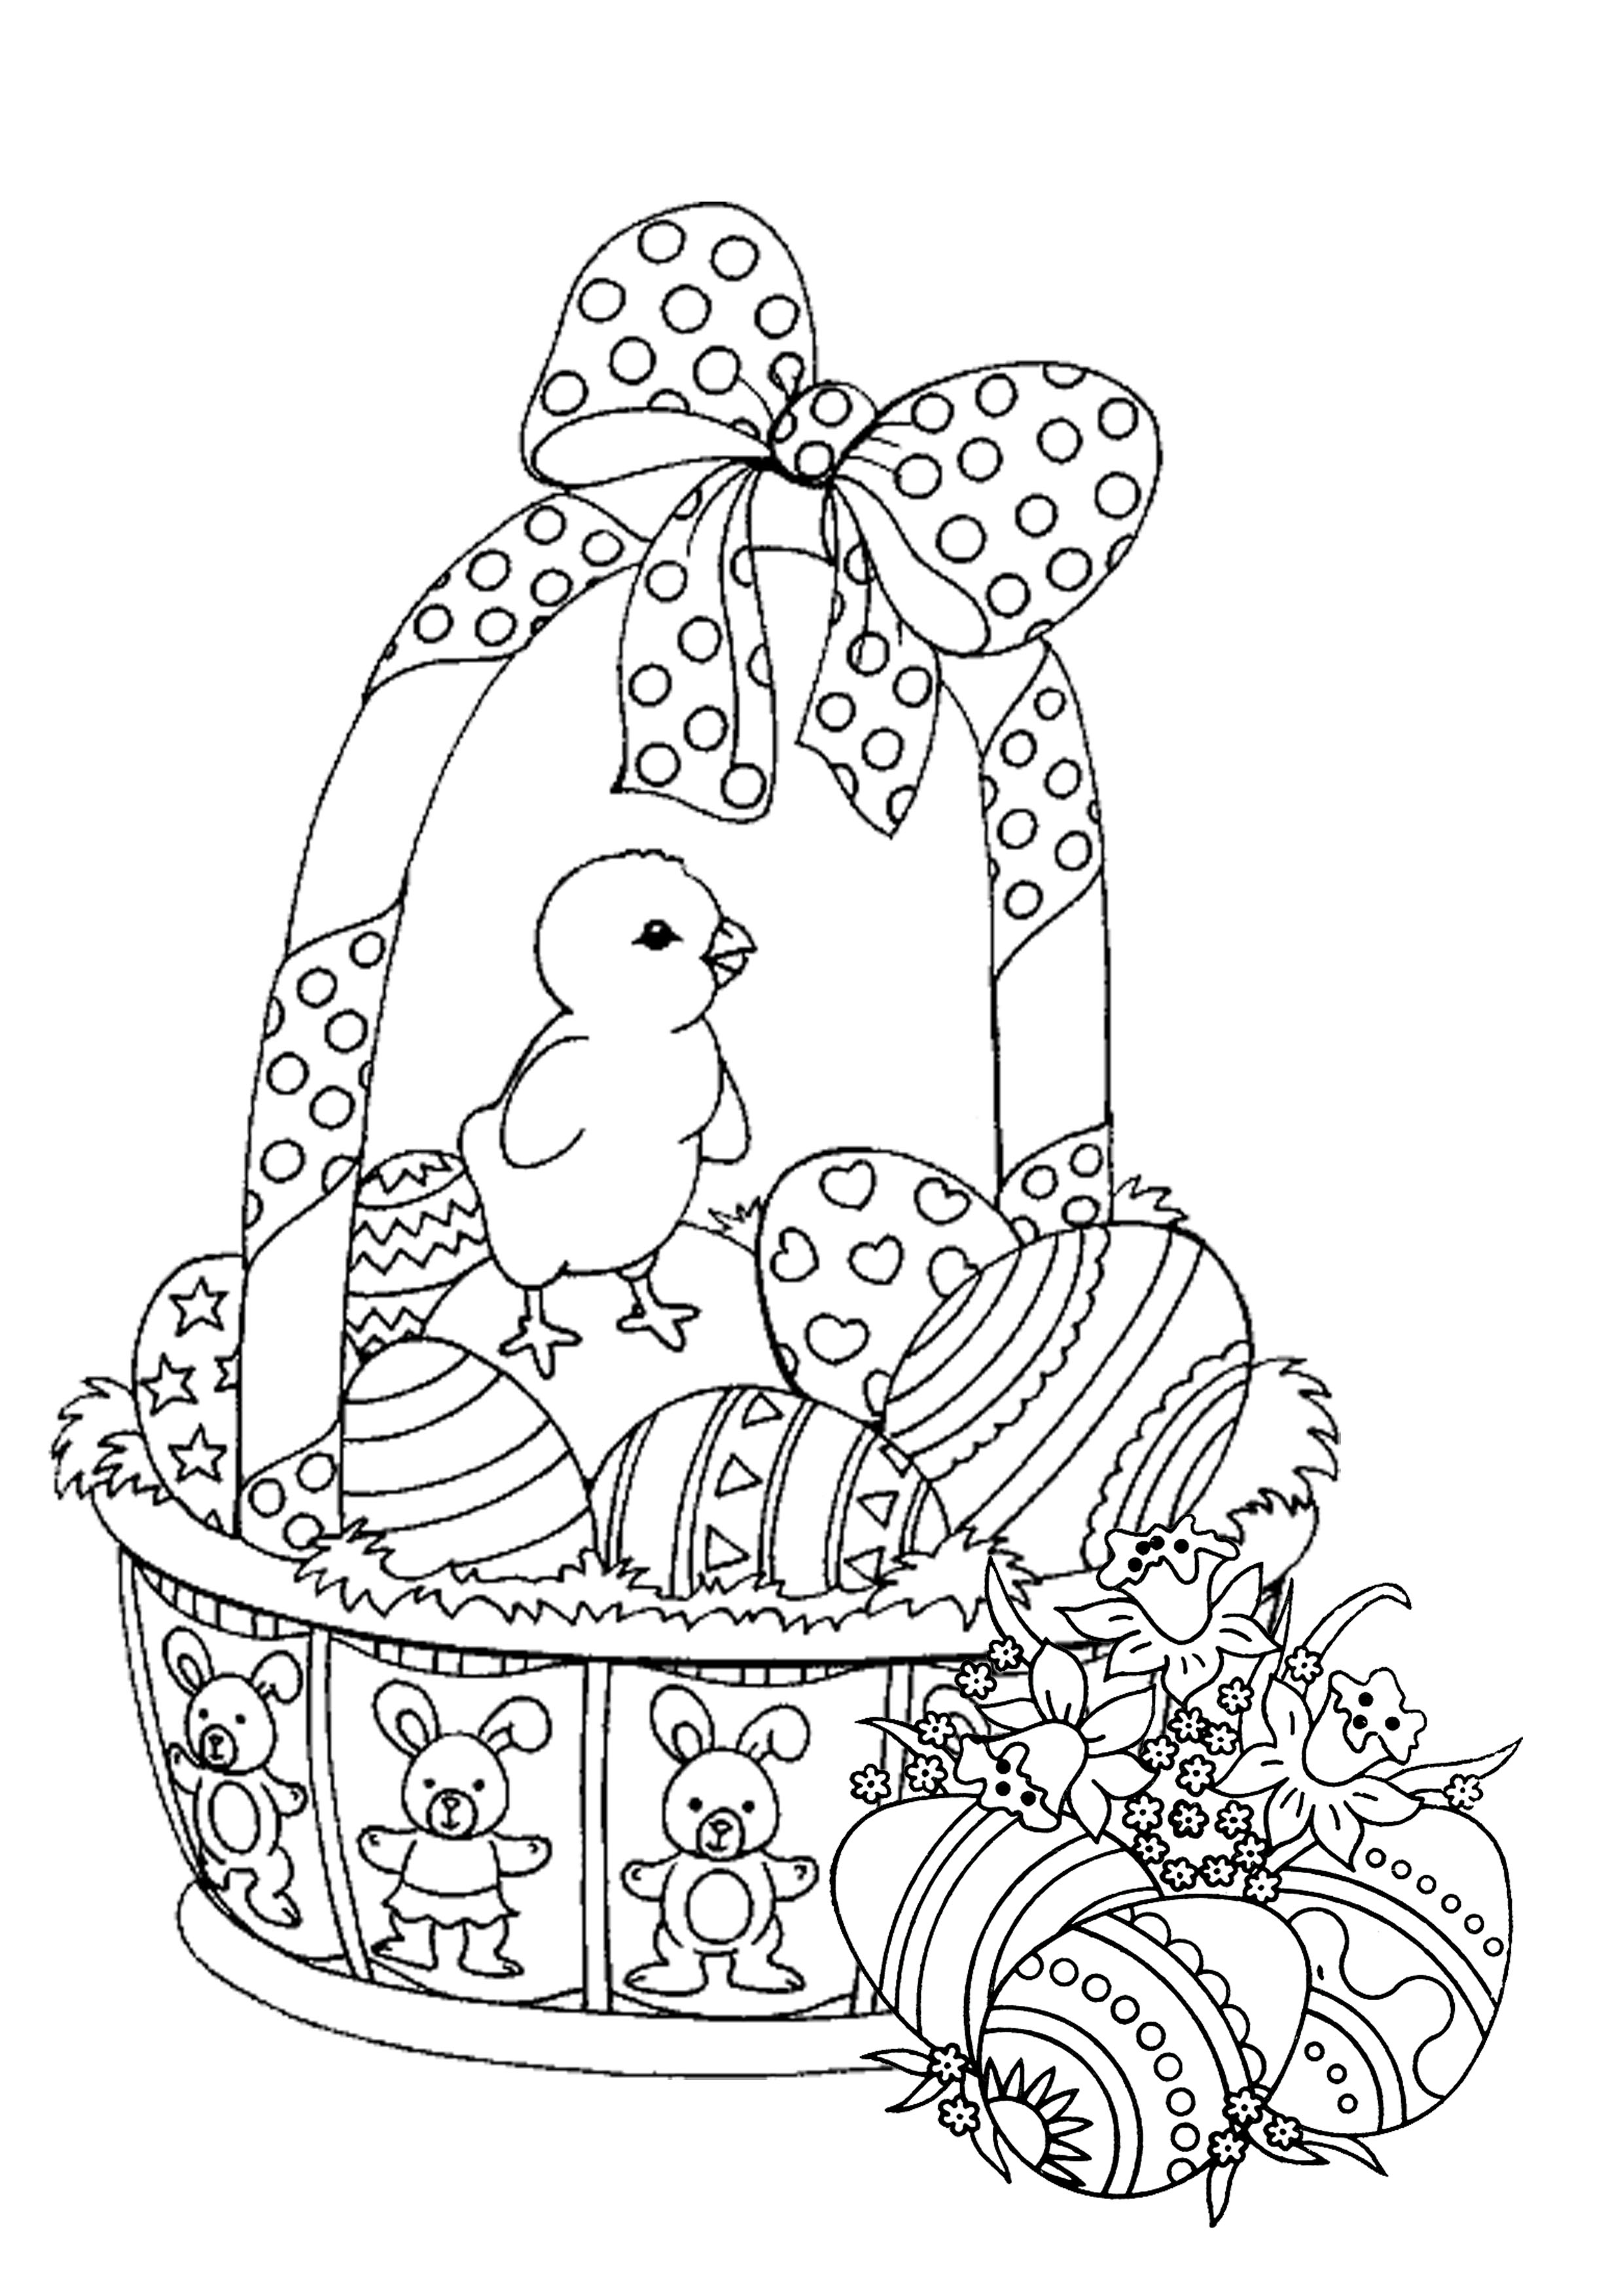 Easter Coloring Pages for Adults - Best Coloring Pages For ...